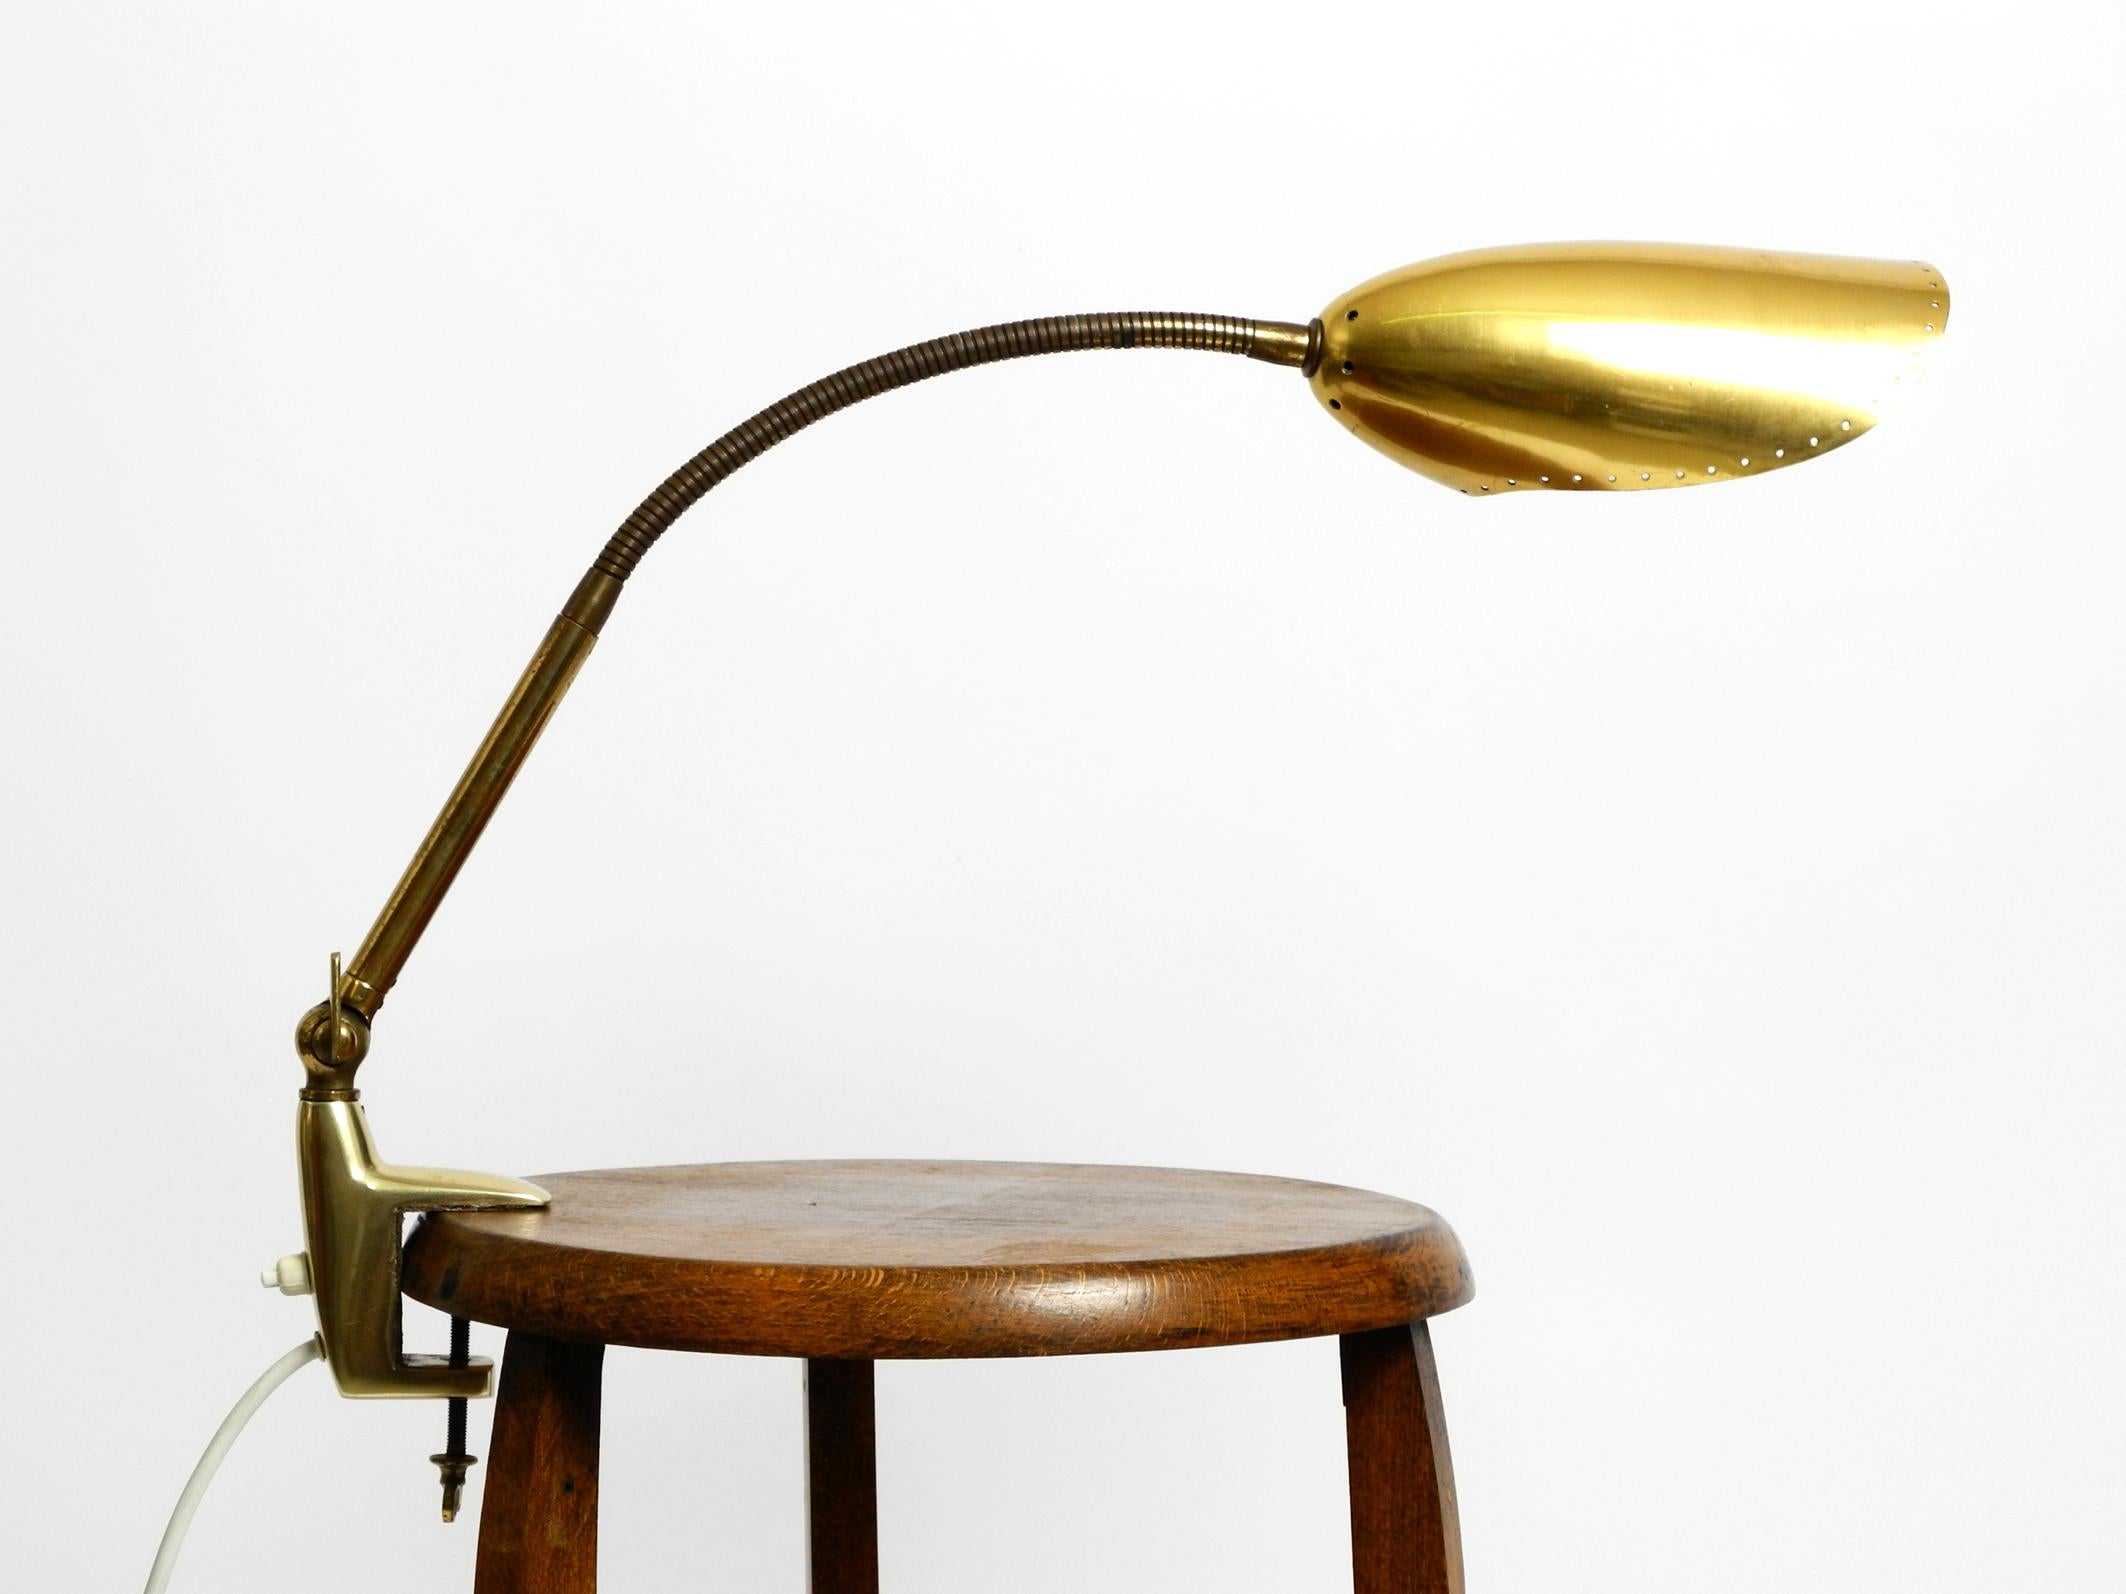 Rare original mid-century brass gooseneck clamp lamp with a long shade.
Gooseneck is easily movable and holds in any position.
Original clamping device with switch and fully functional.
Clamp foot is made of anodized aluminum
No damage to the